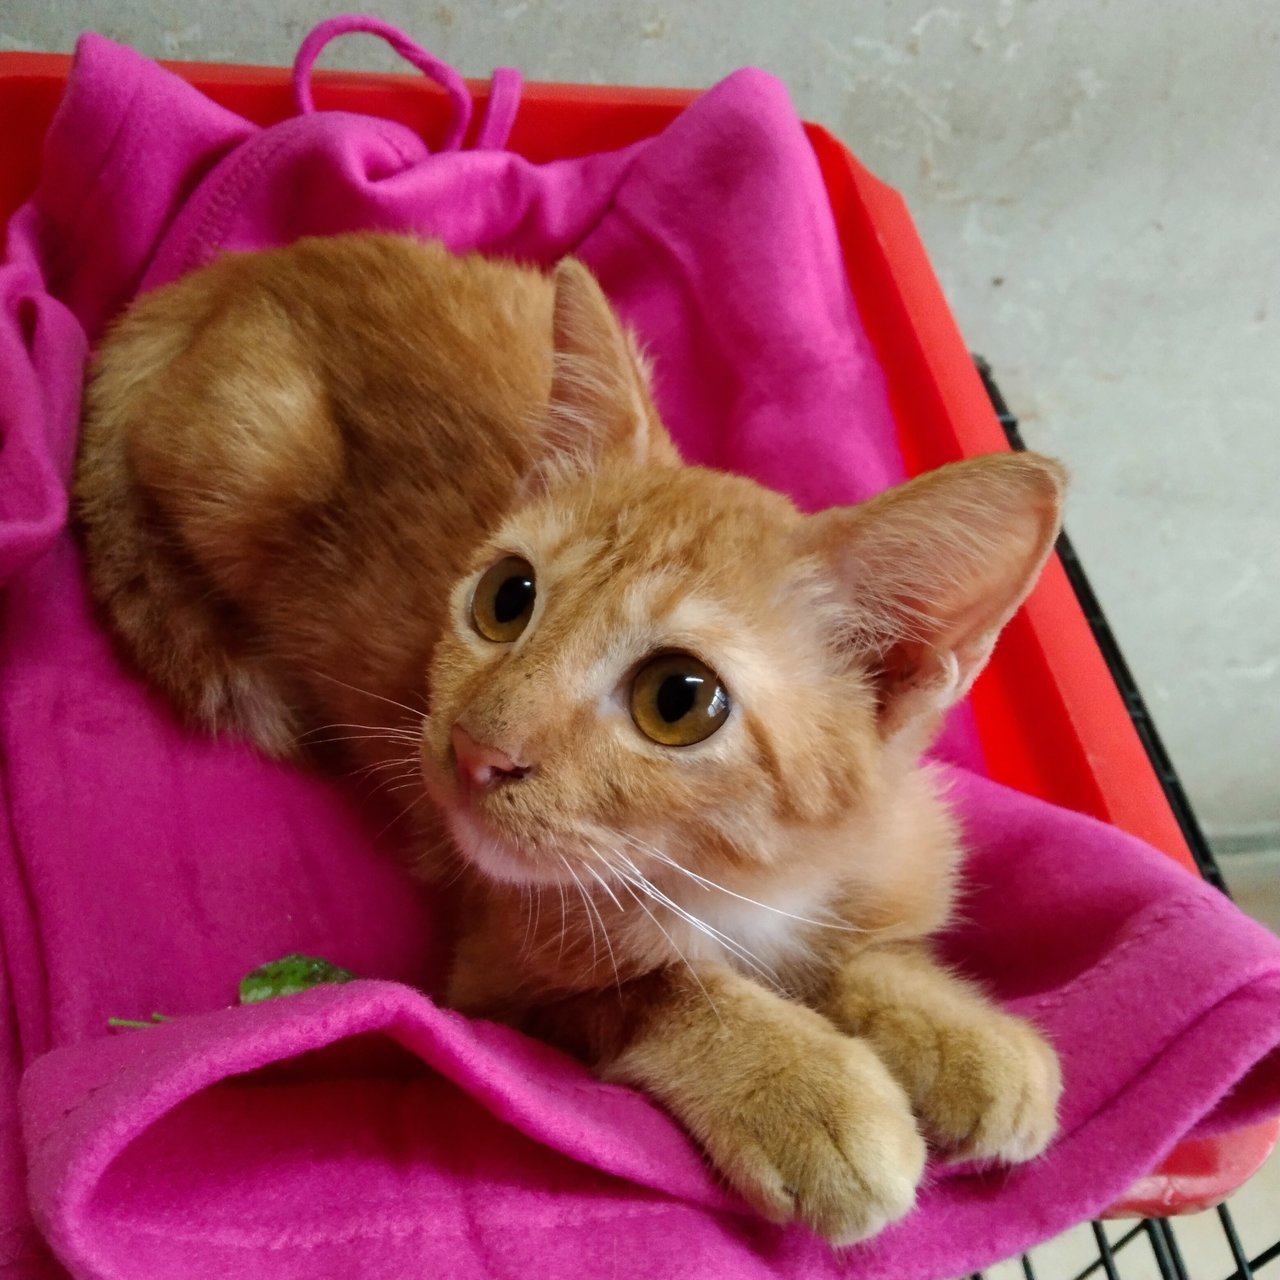 Plus Size Kitten: Where To Find Decoden in Malaysia